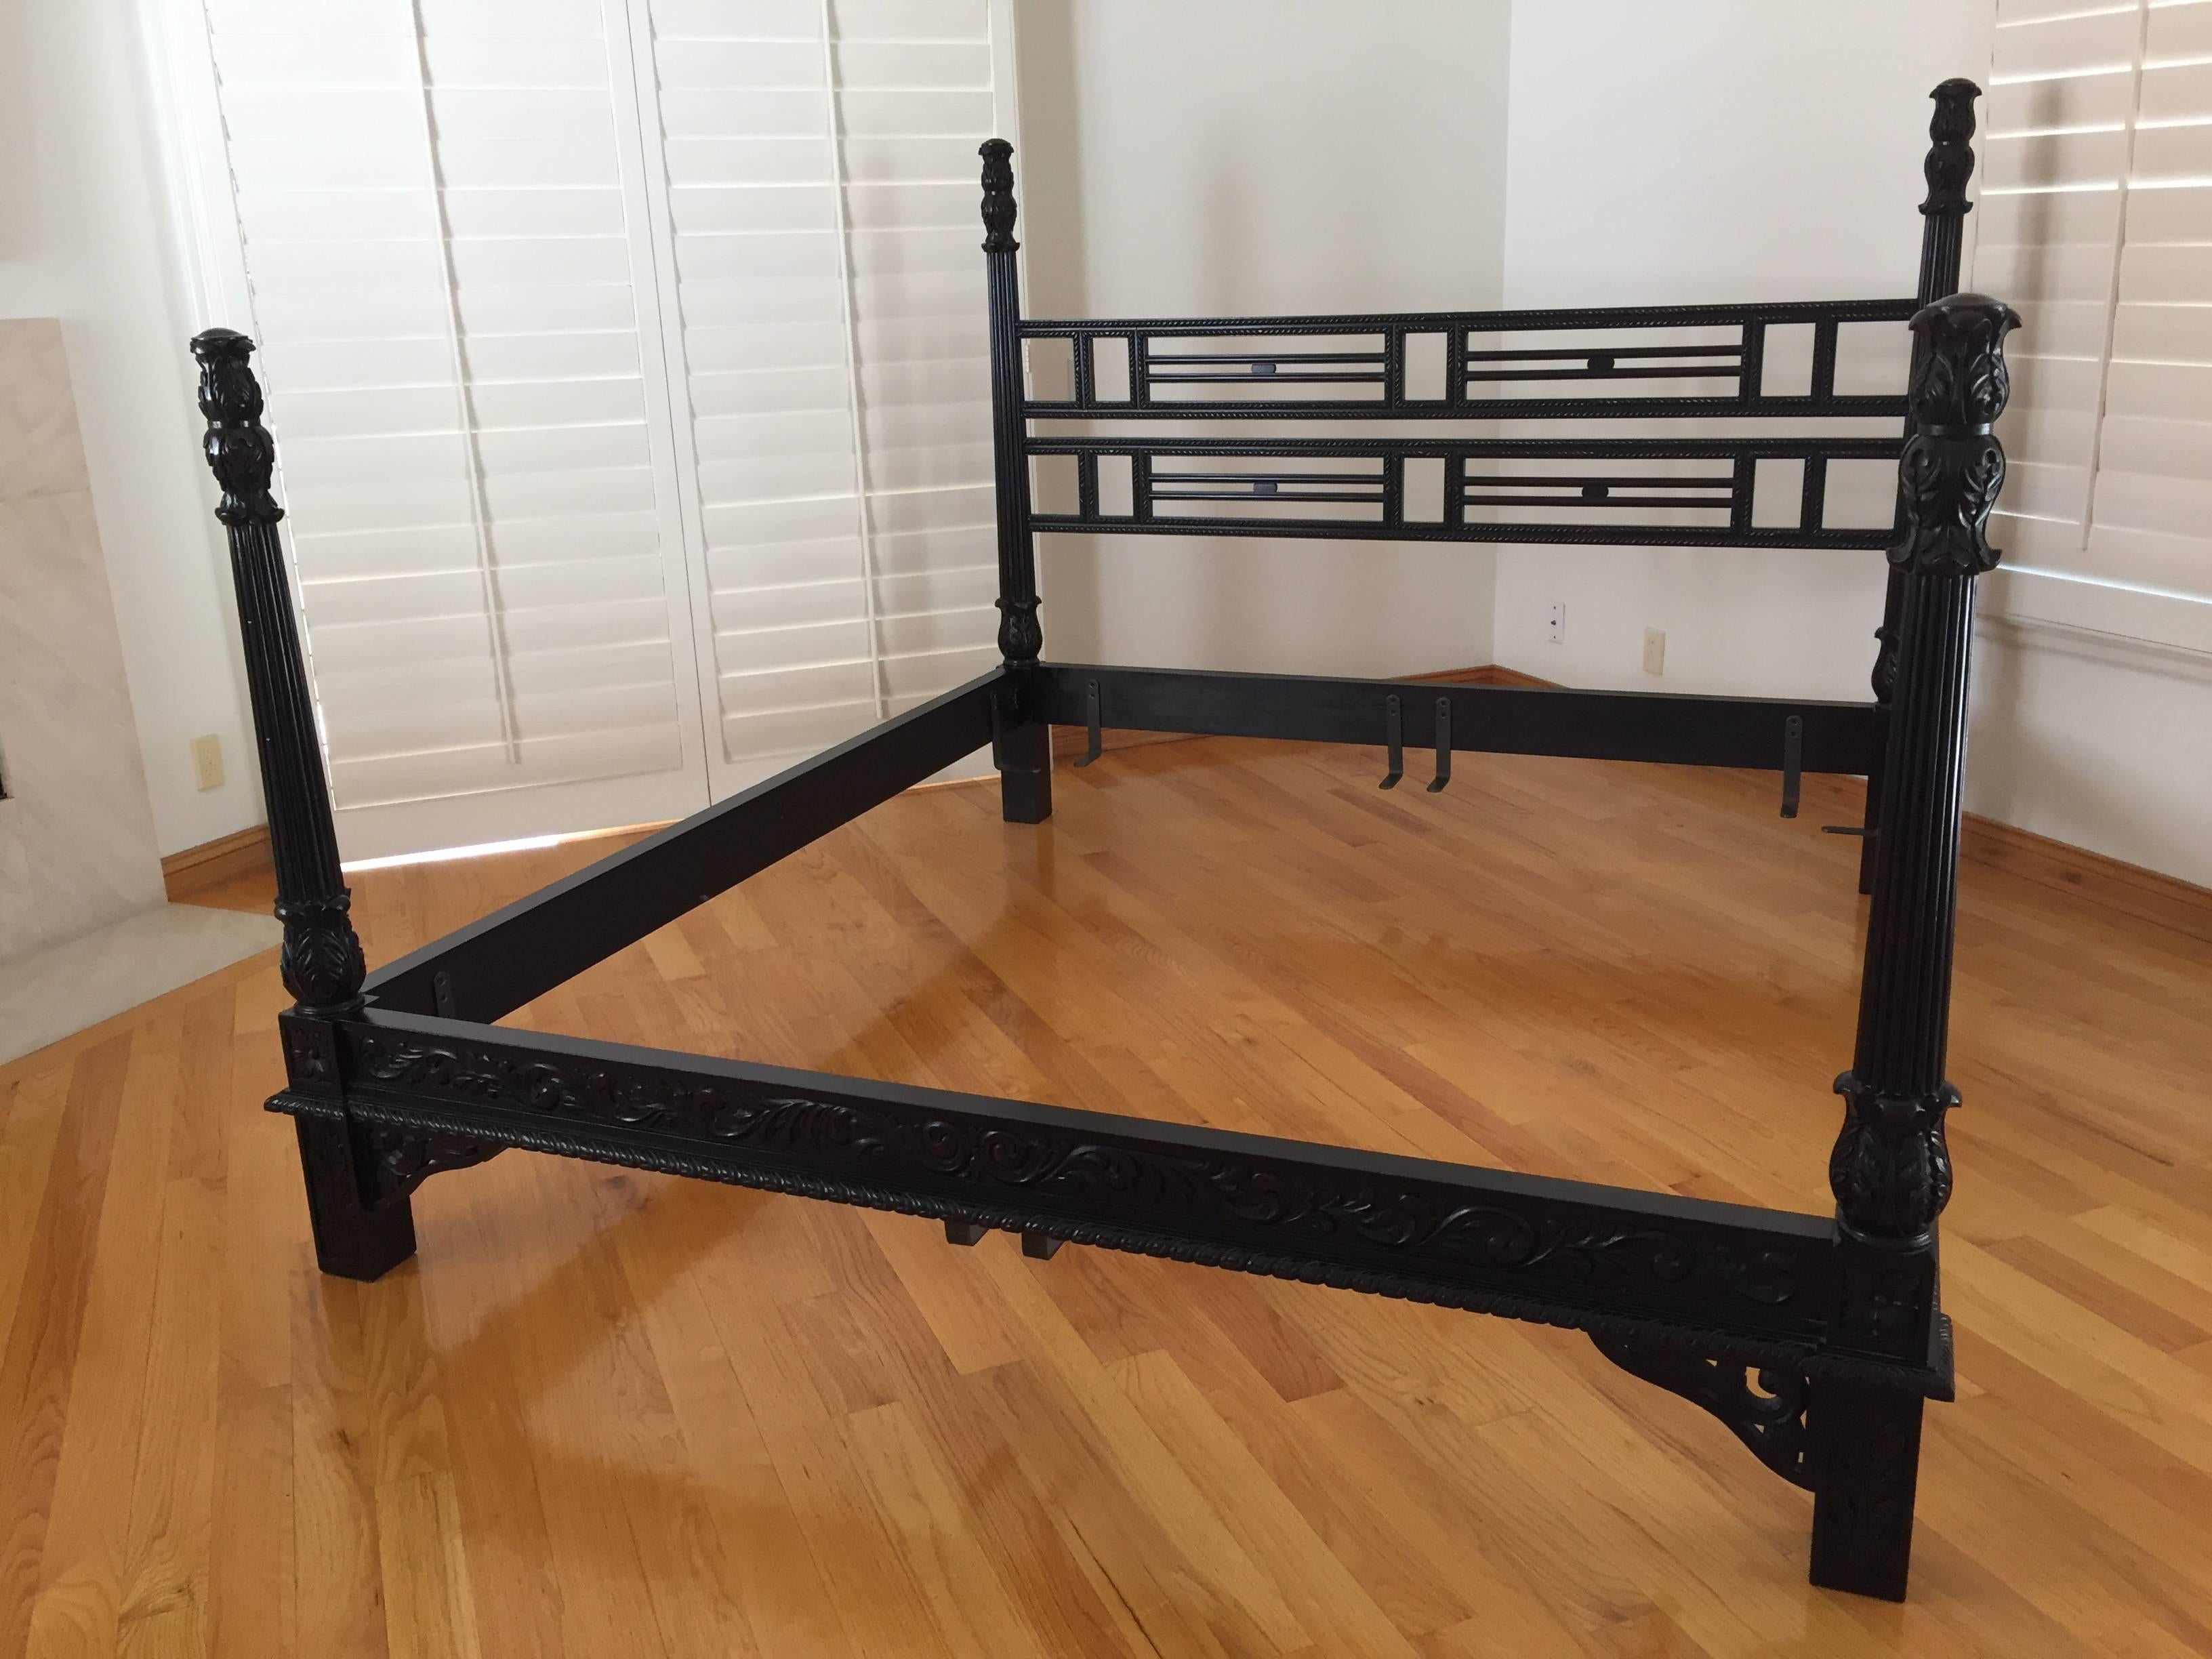 Highly carved four-poster king bed.
This bed is profusely carved on all posts, terminating in magnificent pineapples.
Anglo-Indian style, black painted ebonized look.
Overall size from outside:
92 in. x 80in.
Headbord poles 61in. H.
Foot board